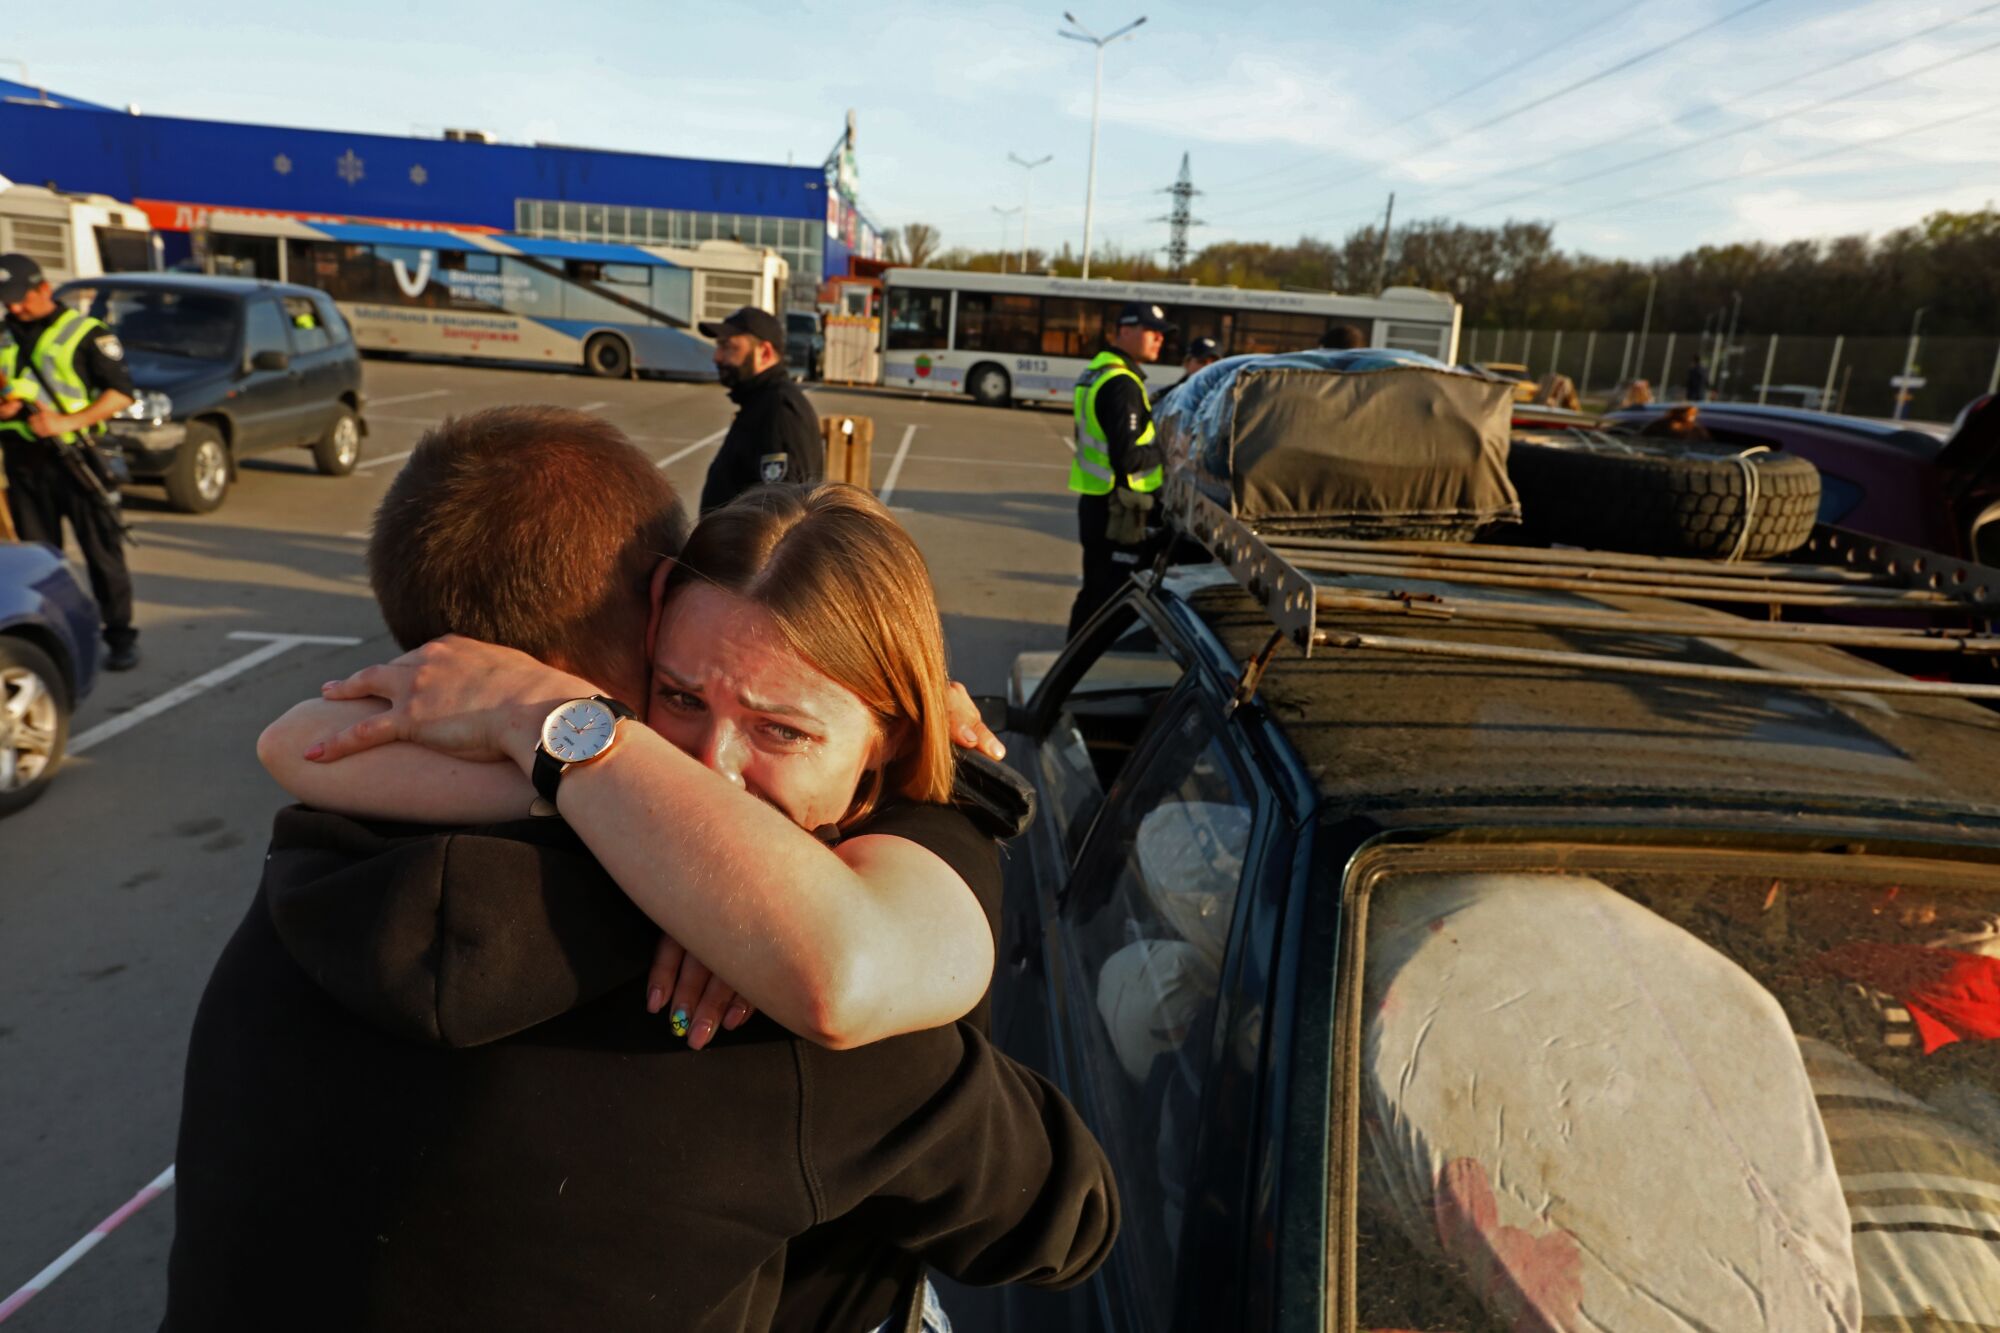 A woman throws her arms around her father in a parking lot full of buses and cars